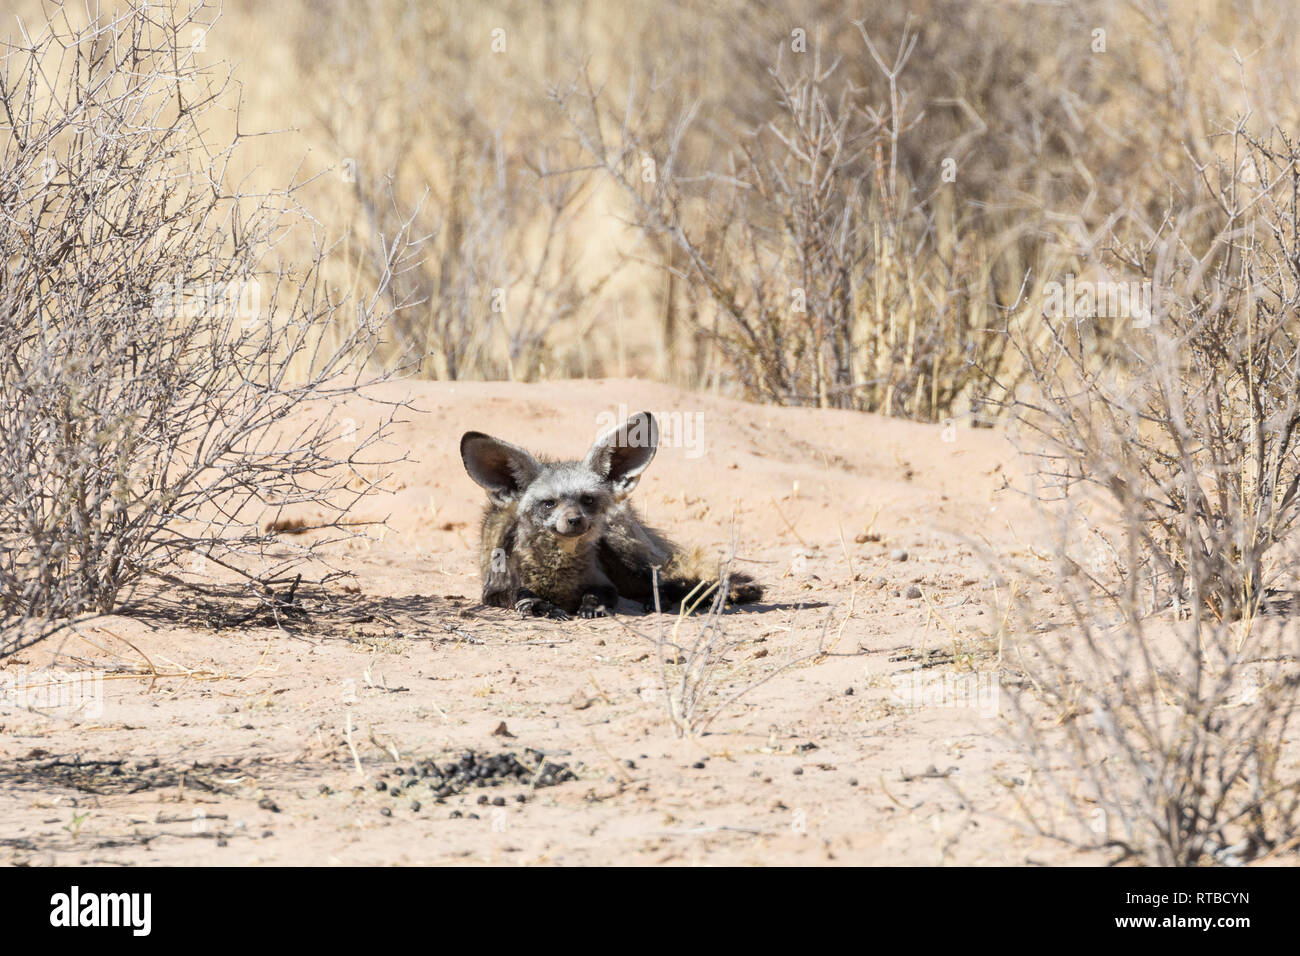 Small bat-eared fox (Otocyon megalotis) lying at the mouth to the den on sand Kalahari, Kgalagadi Transfrontier Park, Northern Cape, South Africa Stock Photo